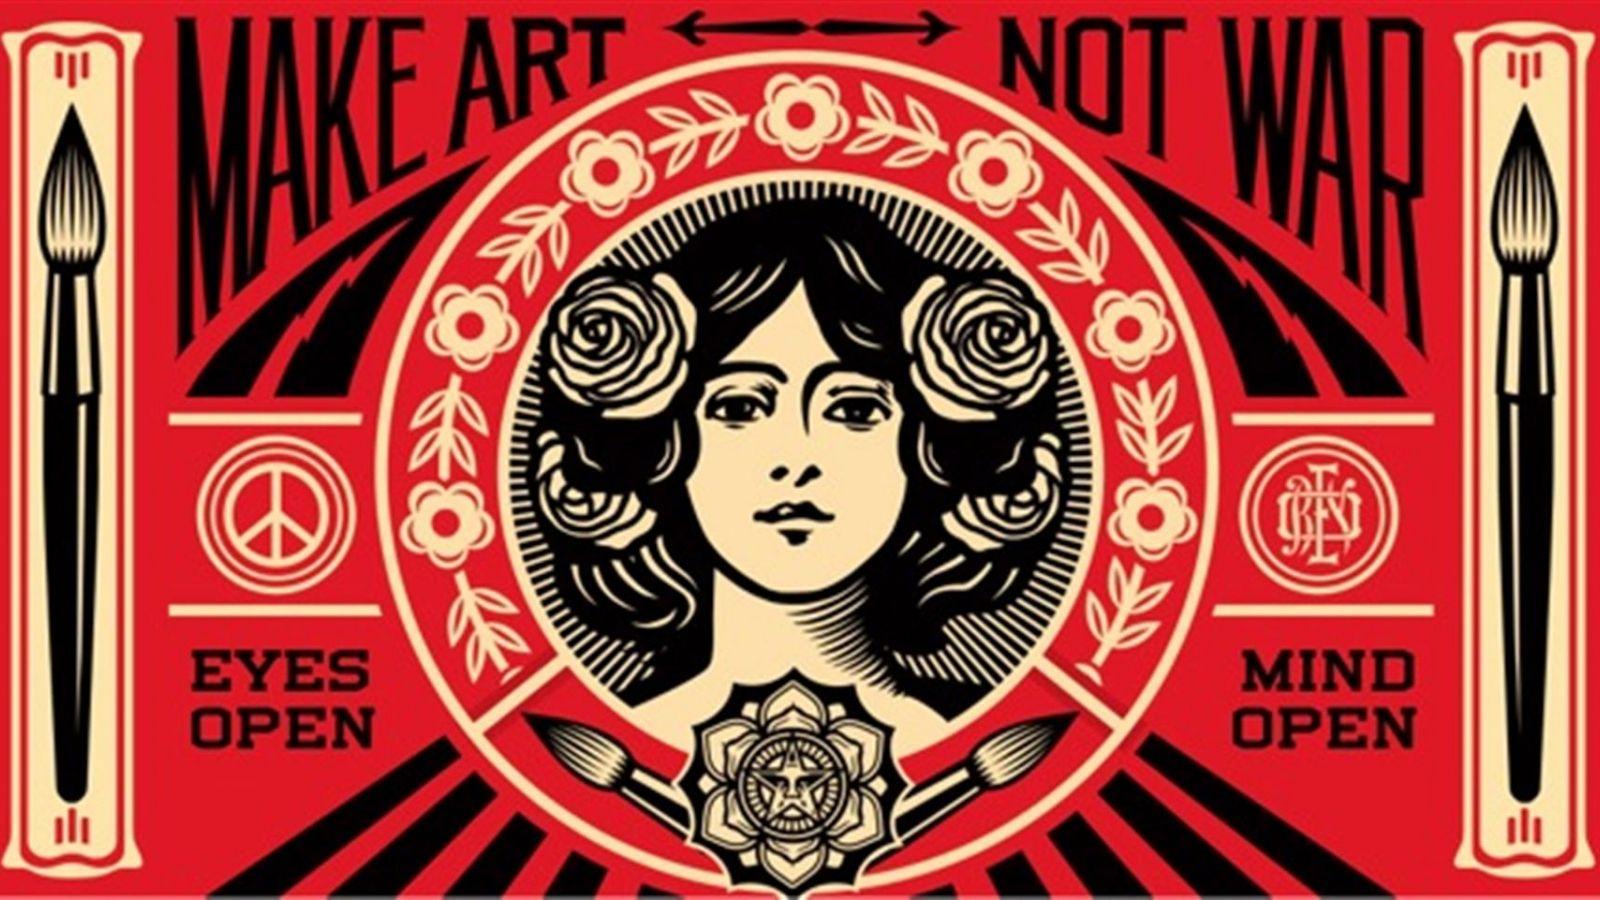 Obey Art Wallpapers - Top Free Obey Art